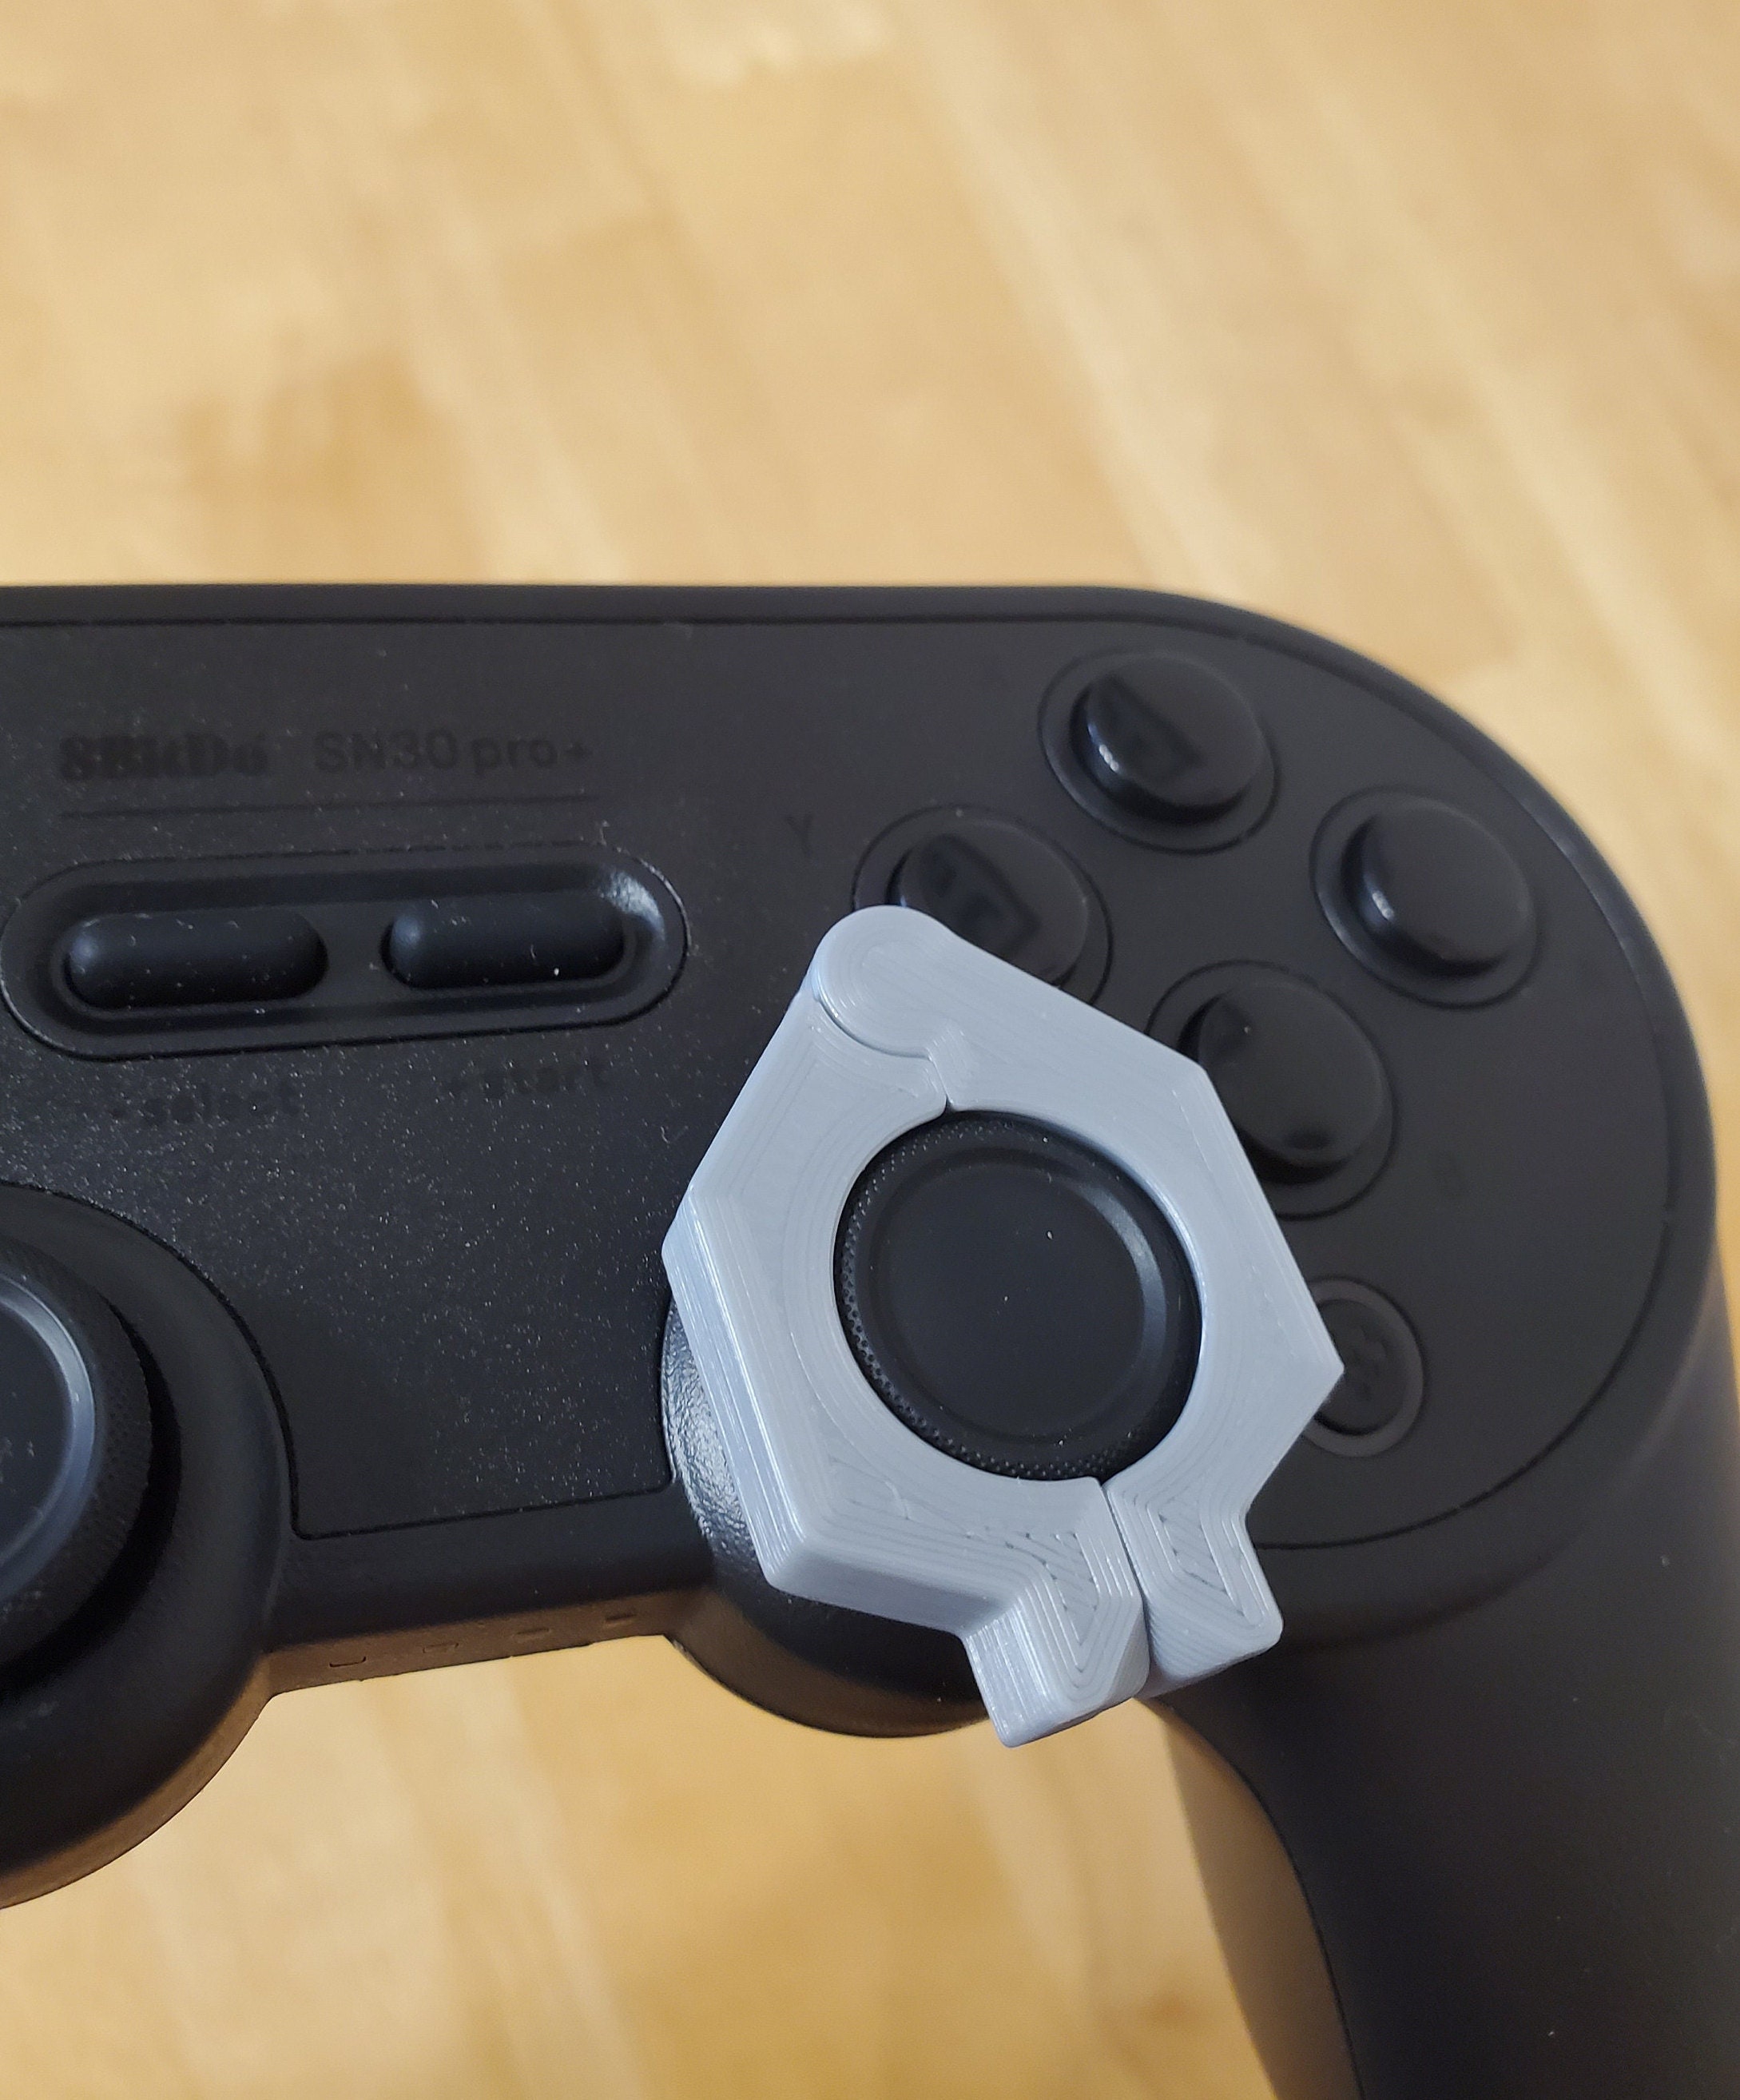 8bitdo Controller Stand 